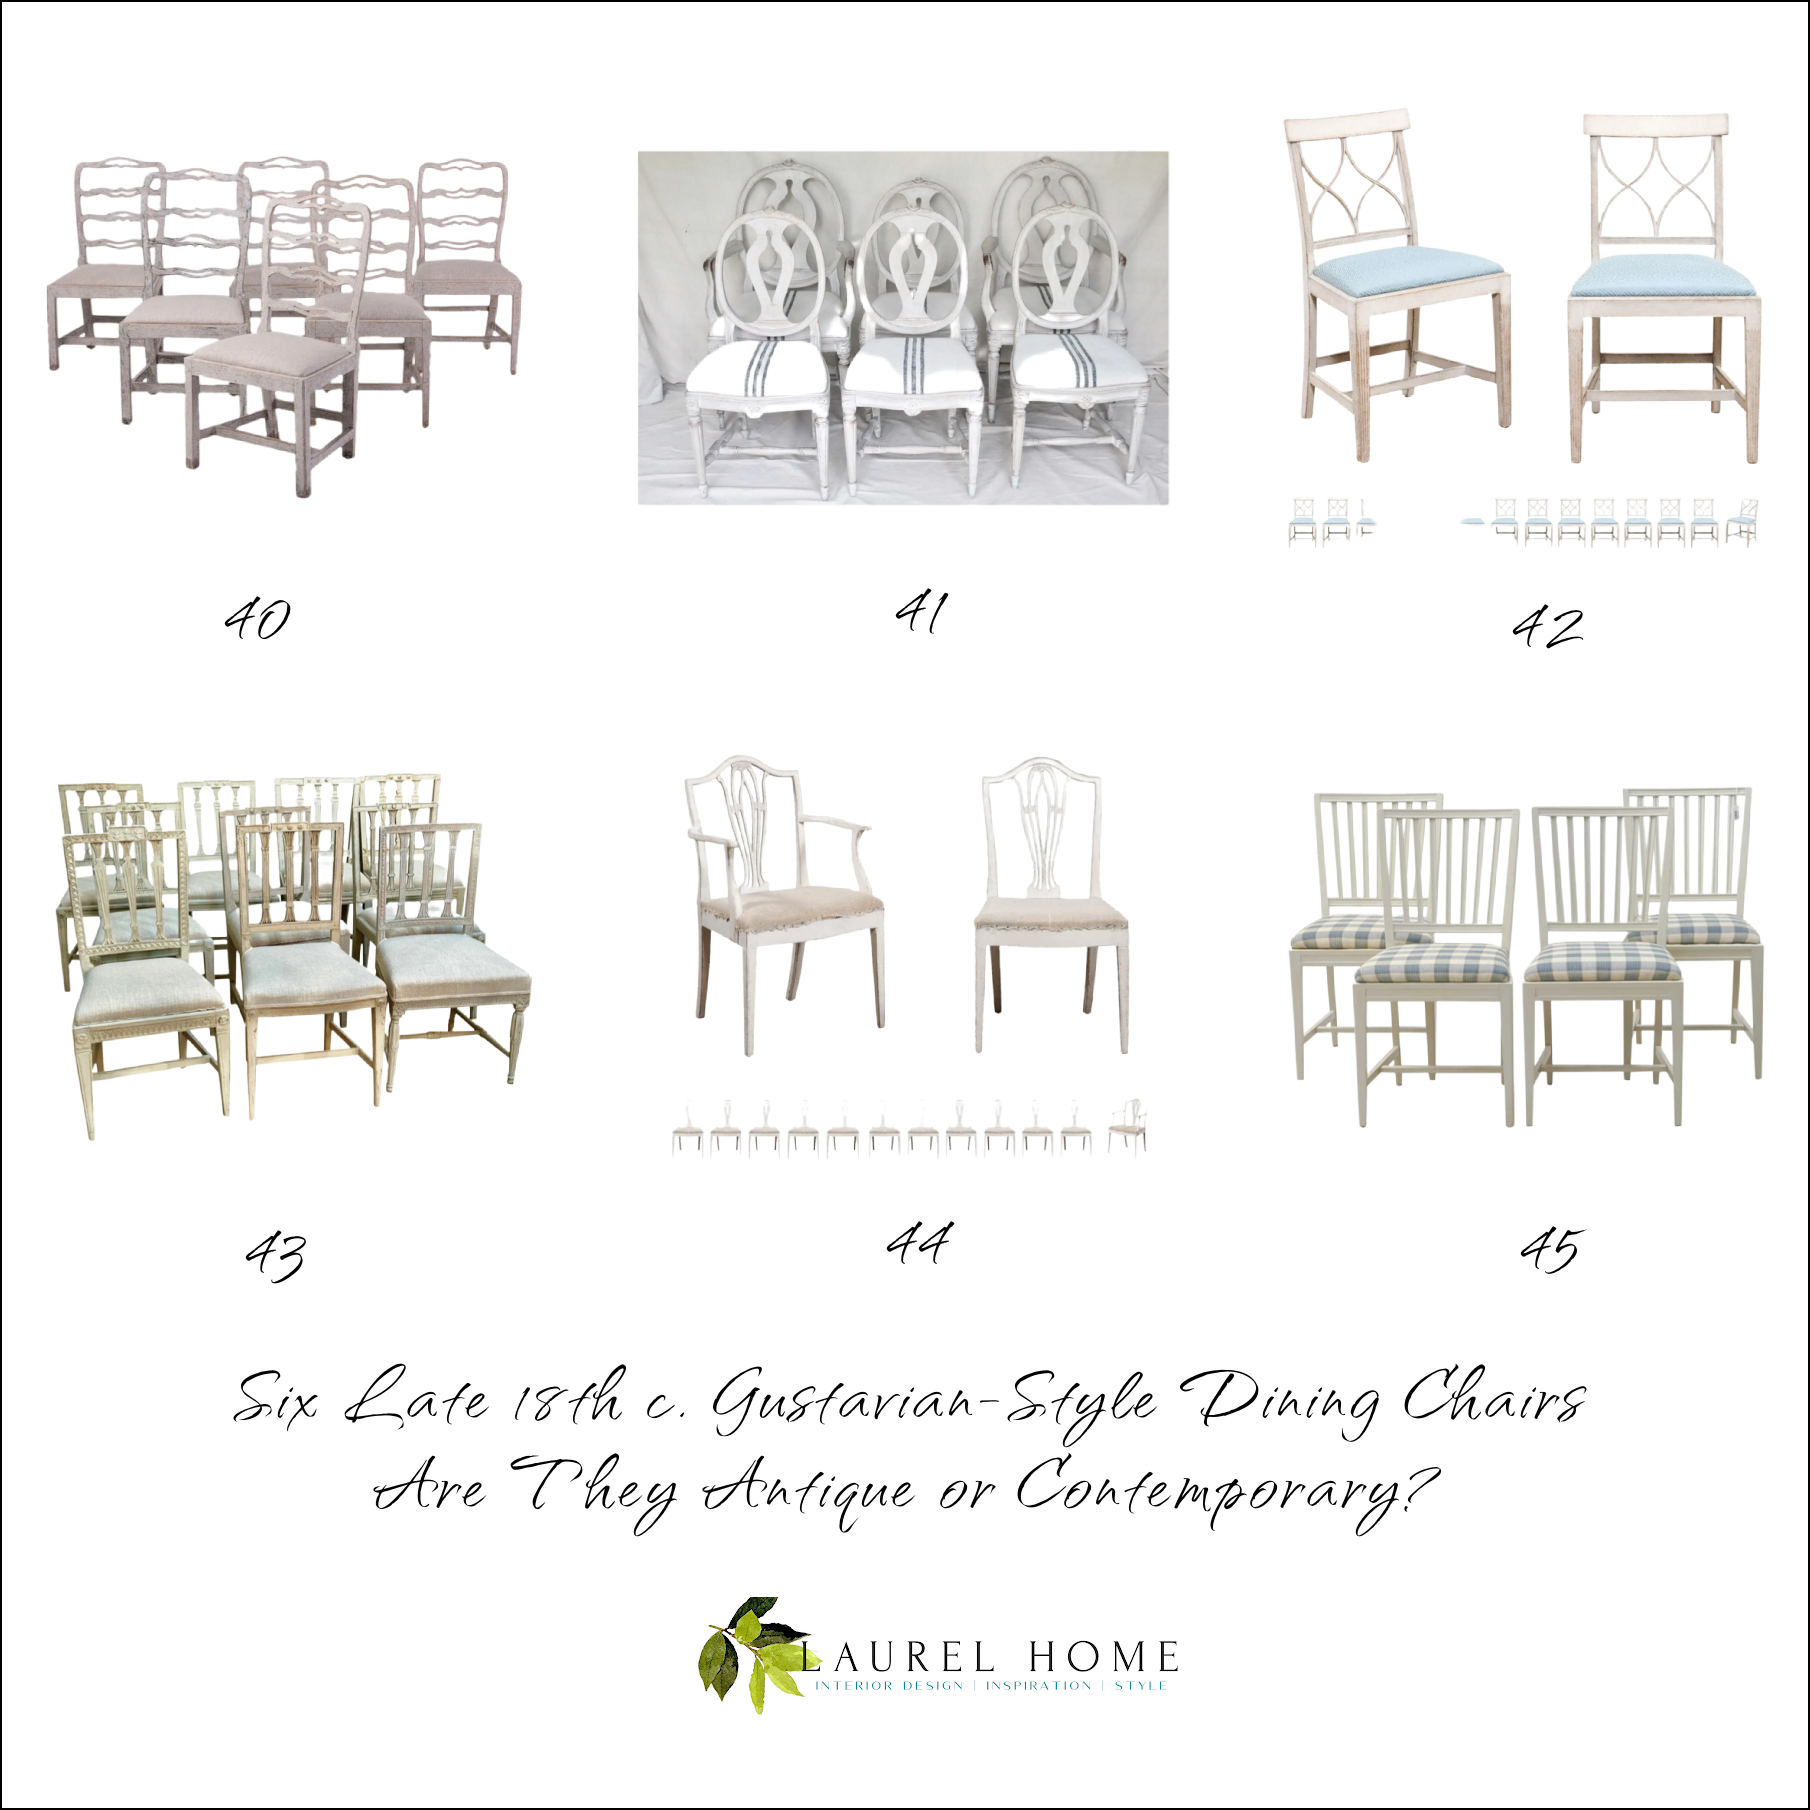 Six Late 18th c Gustavian-Style Dining Chairs - Antiques or contemporary